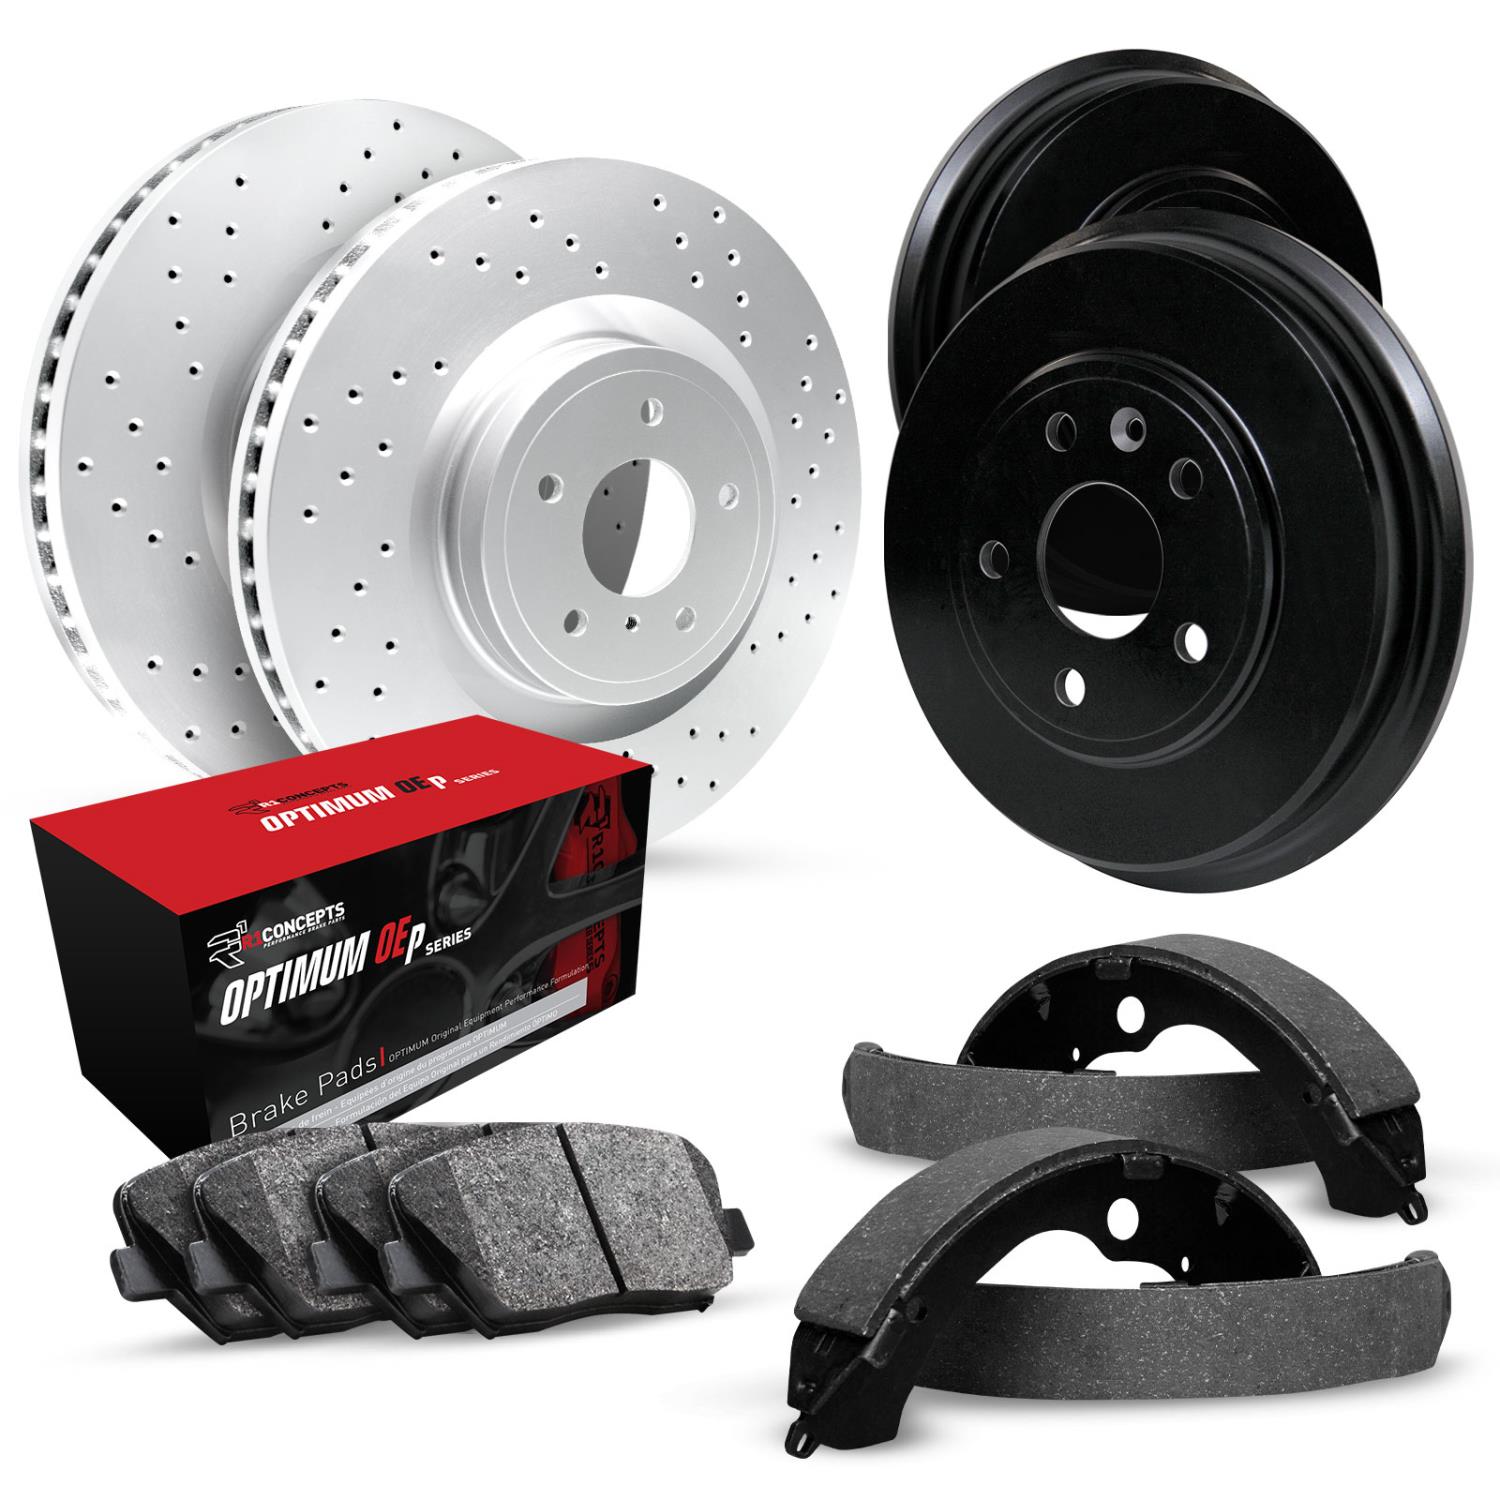 GEO-Carbon Drilled Brake Rotor & Drum Set w/Optimum OE Pads & Shoes, 1991-1991 GM, Position: Front & Rear